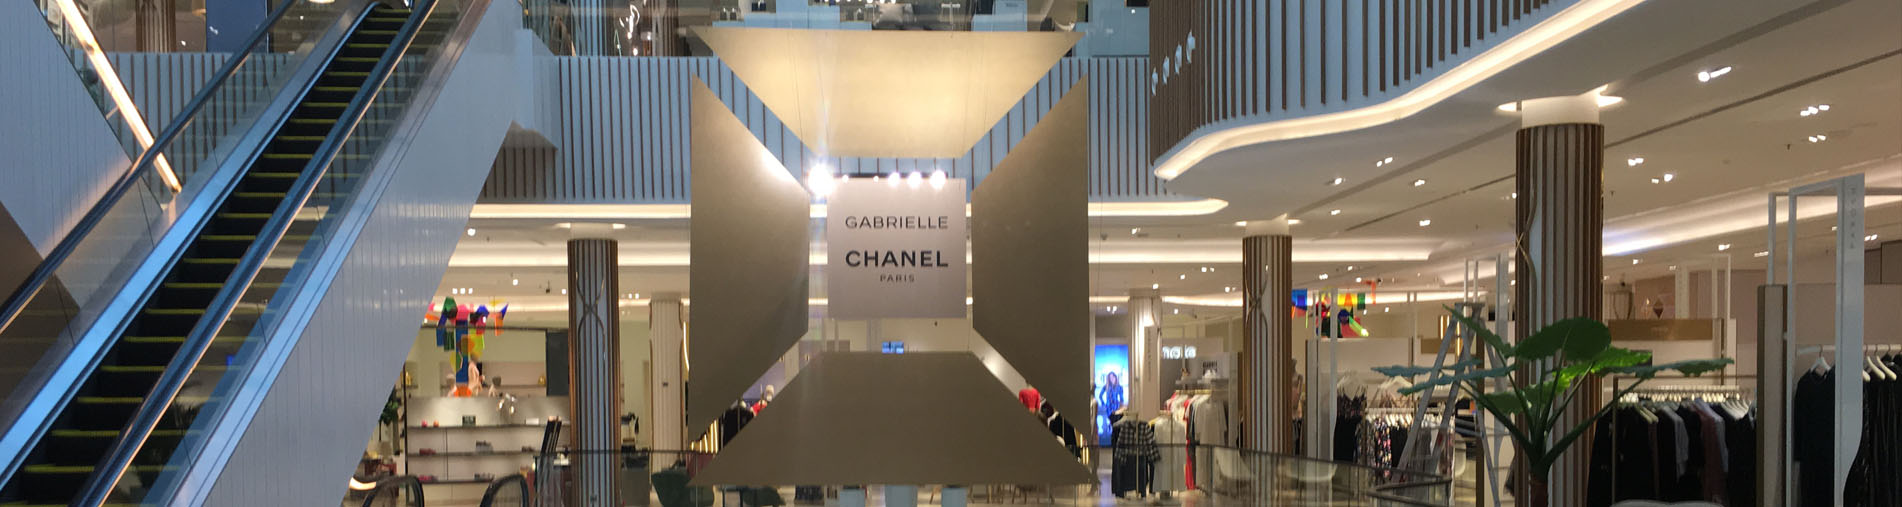 Channel Display at Festival City Mall